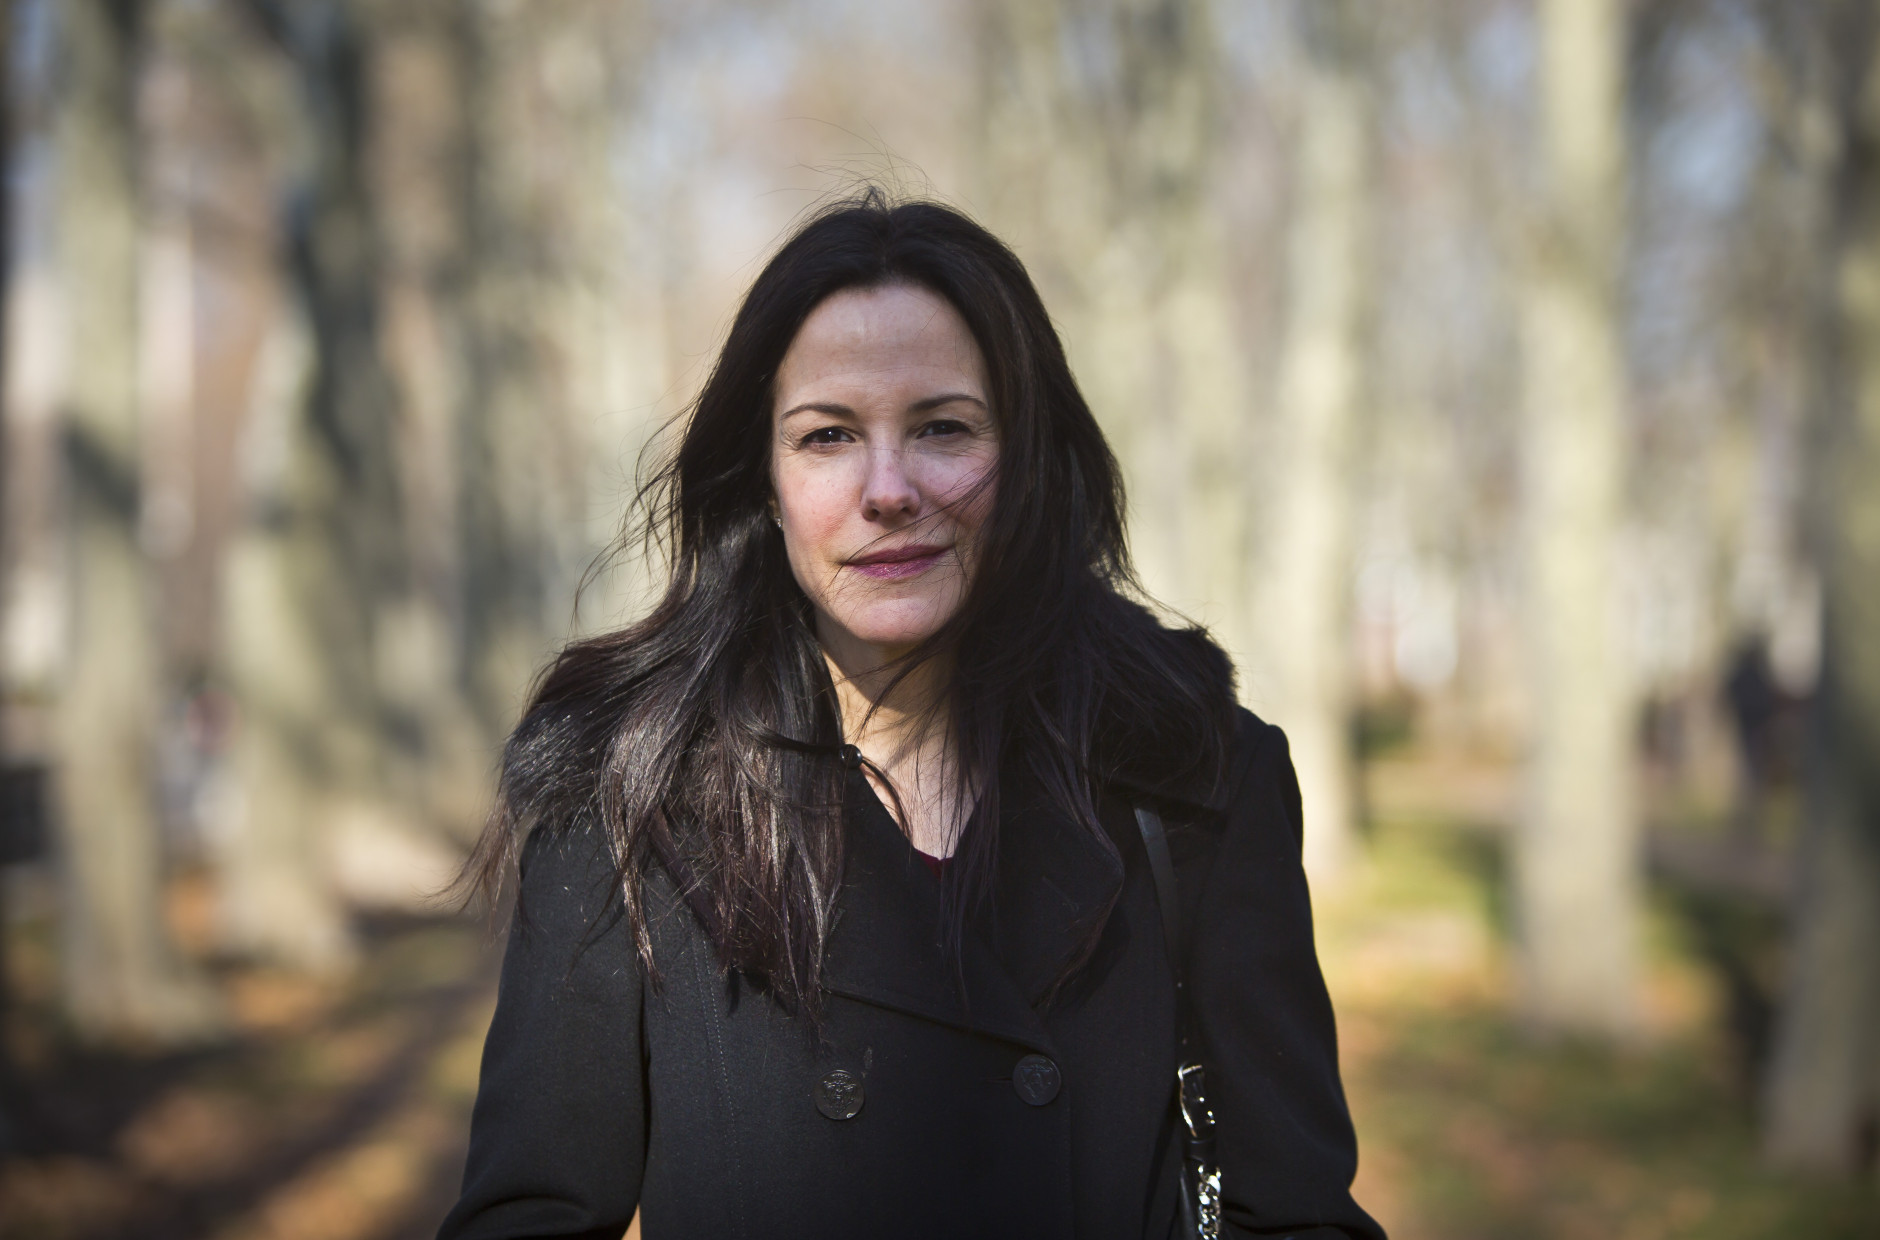 In this Dec. 7, 2015 photo, actress and author Mary-Louise Parker poses for portrait in a park in the Brooklyn borough of New York. Parker's "Dear Mr. You," a collection of lyrical and often emotional essays about men addressed to everyone from former (and unnamed) lovers to family members, has been highly praised by critics and made the actress a respected name in the literary world. (AP Photo/Bebeto Matthews)